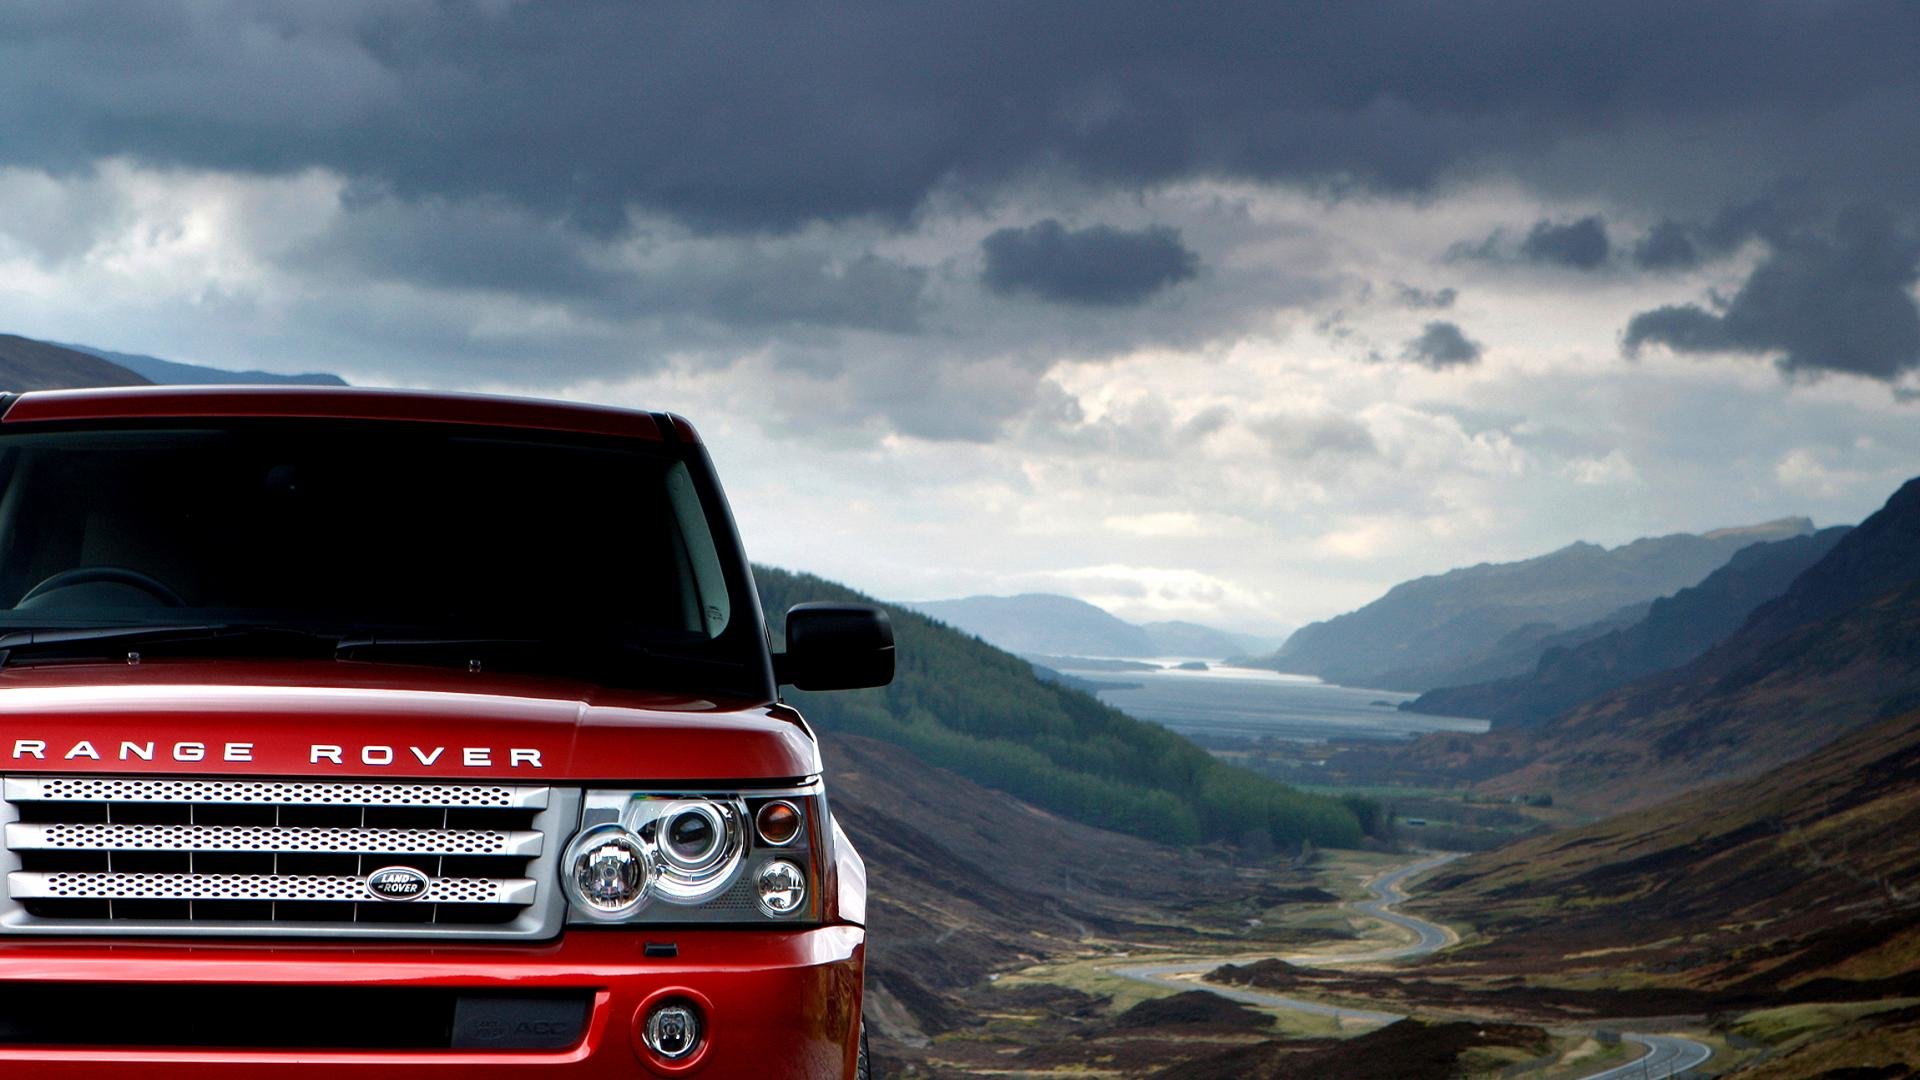 High resolution Range Rover full hd wallpaper ID:162901 for computer